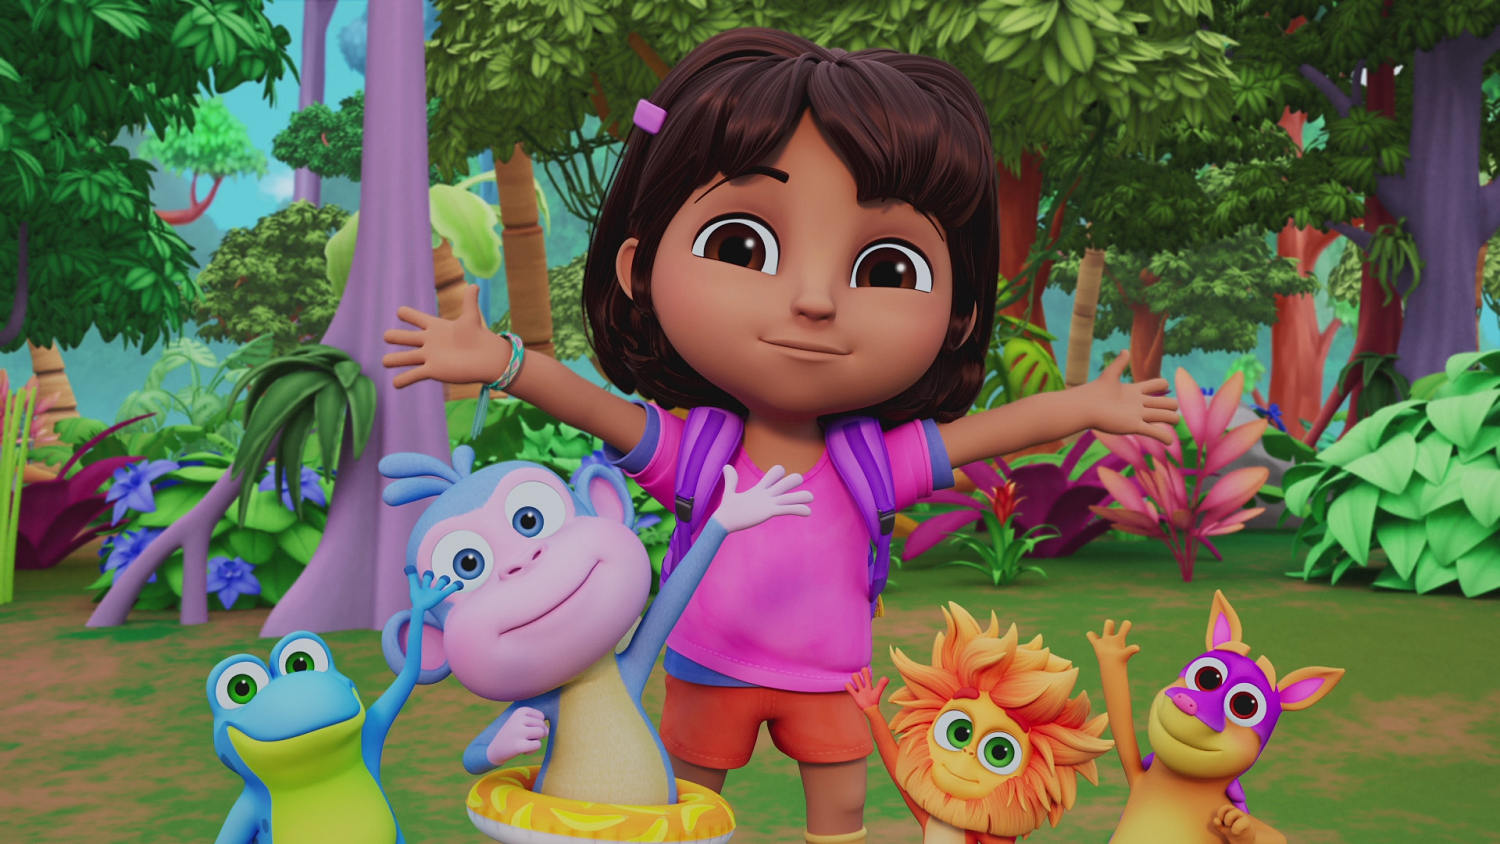 'Dora the Explorer' takes kids on new — and bilingual — adventures